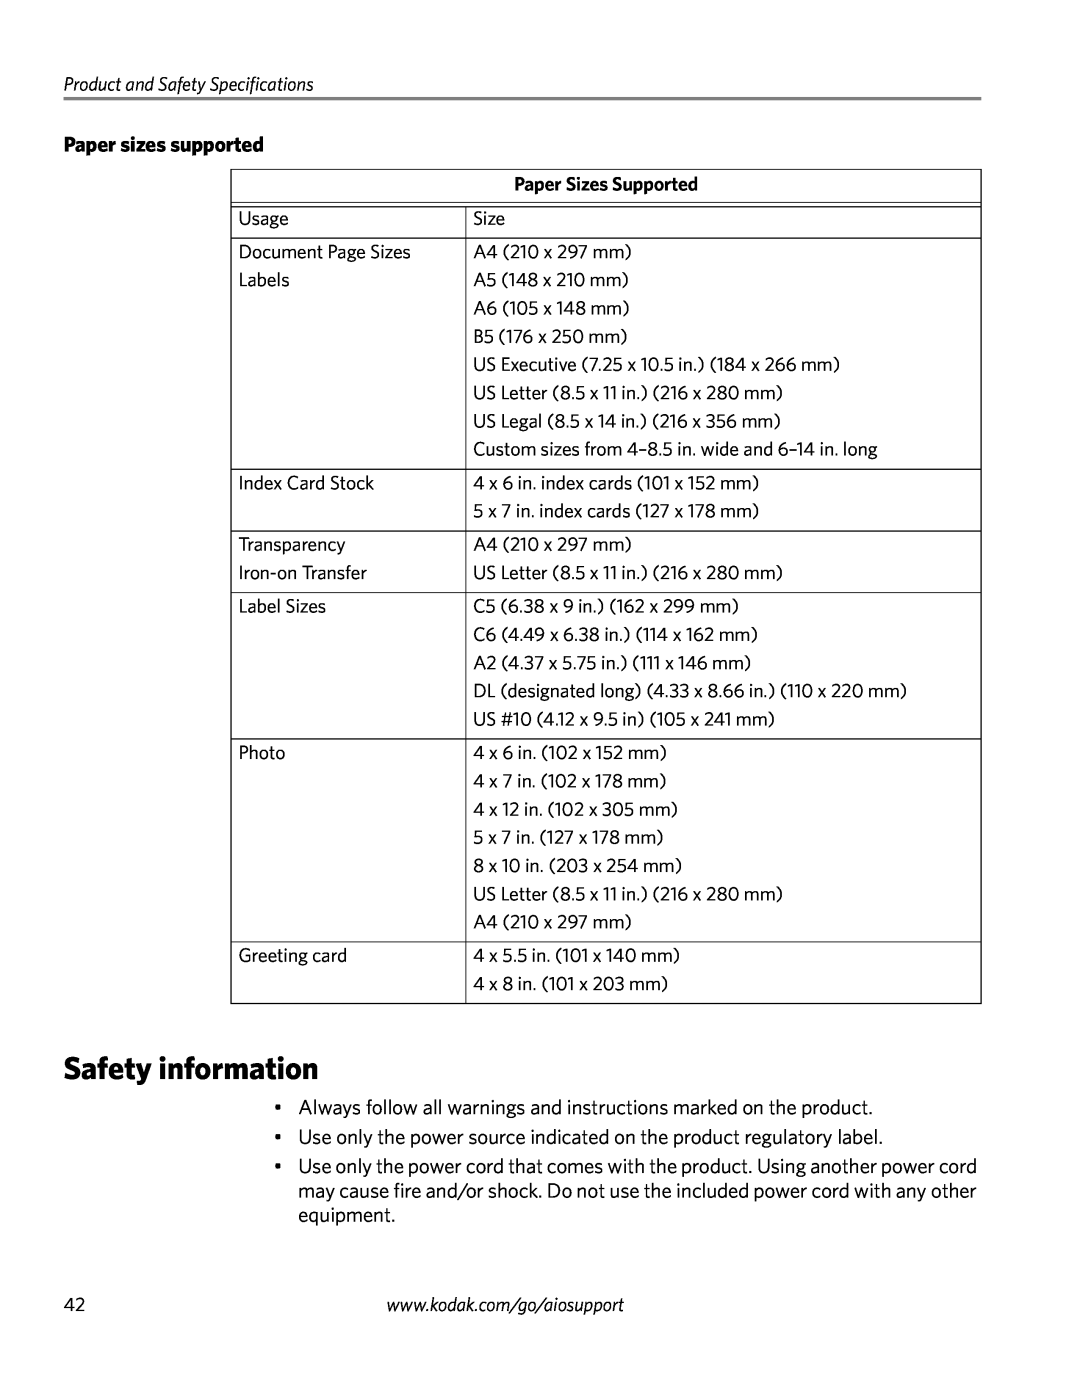 Kodak ESP 3260 manual Safety information, Paper sizes supported, Product and Safety Specifications, Paper Sizes Supported 